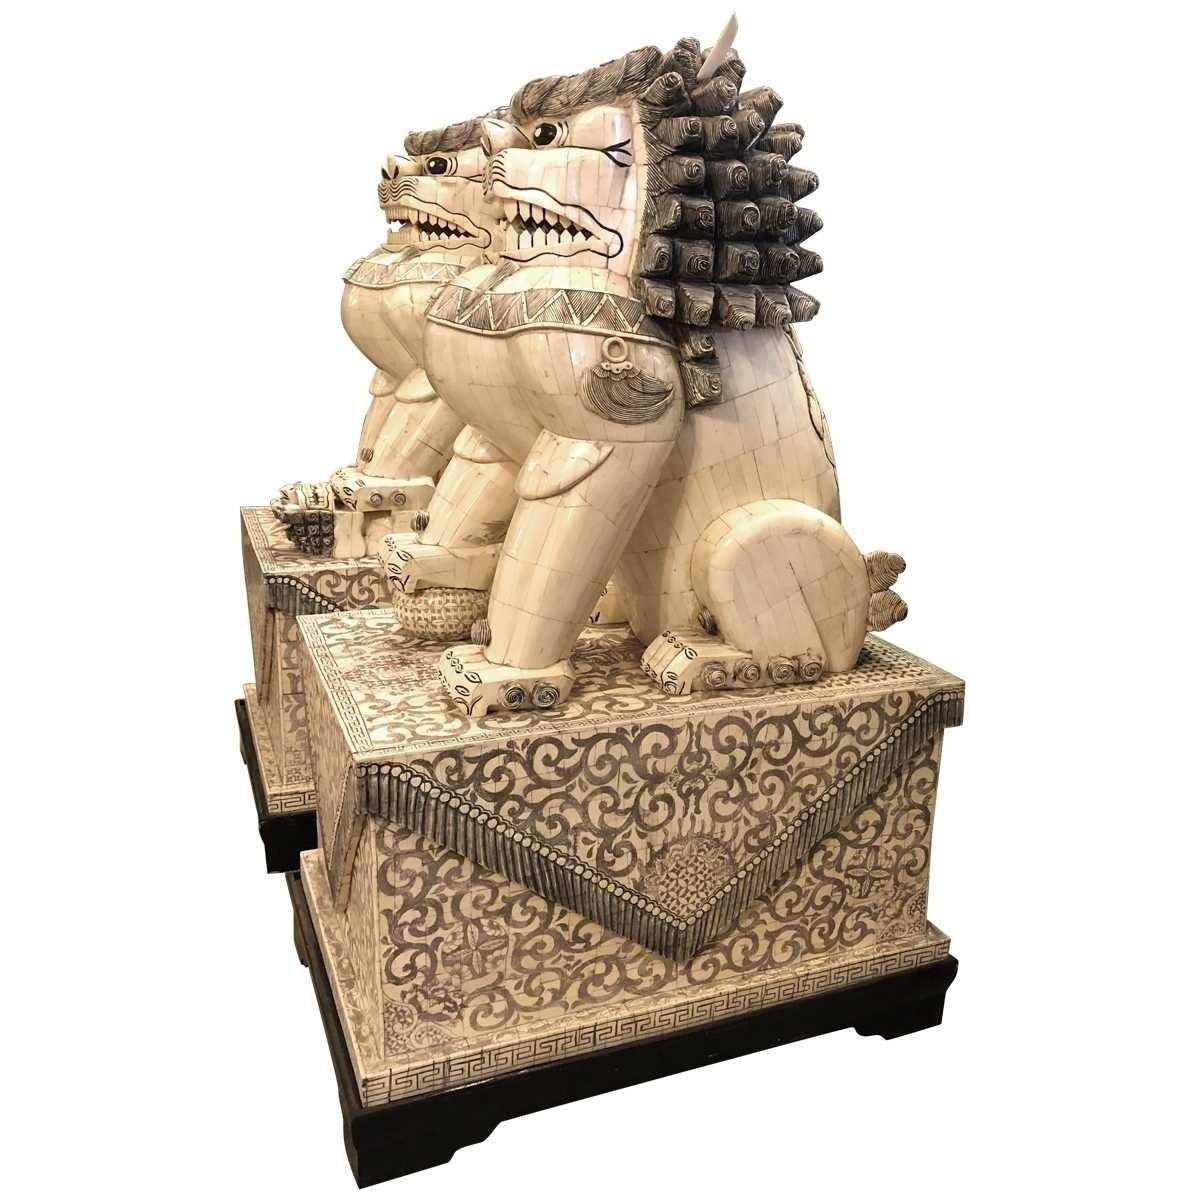 Palace oversized Fu dogs.
One of the world's oldest traditions, Chinese art spans thousands of years and numerous eras. Traditionally, Chinese art and décor is defined by a decorative, yet seemingly understated quality done using earth tones and a